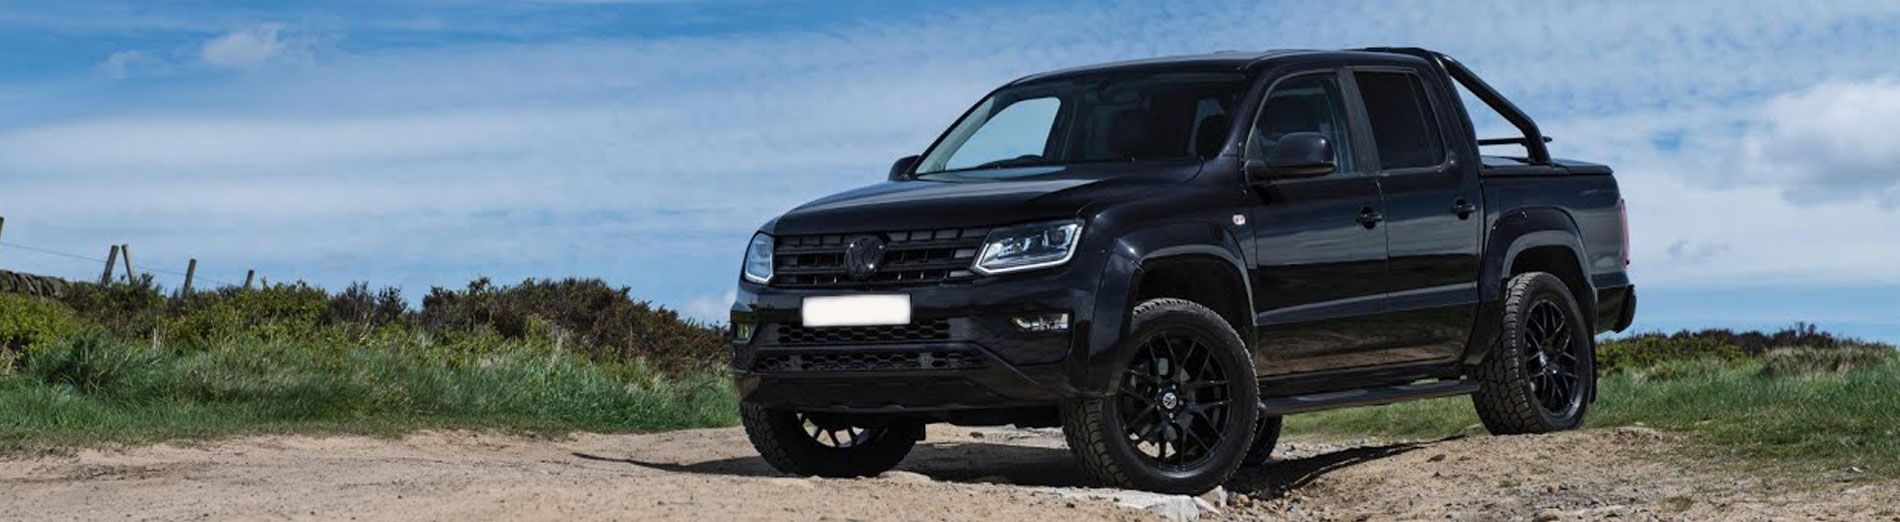 The Amarok Black Edition is open for order